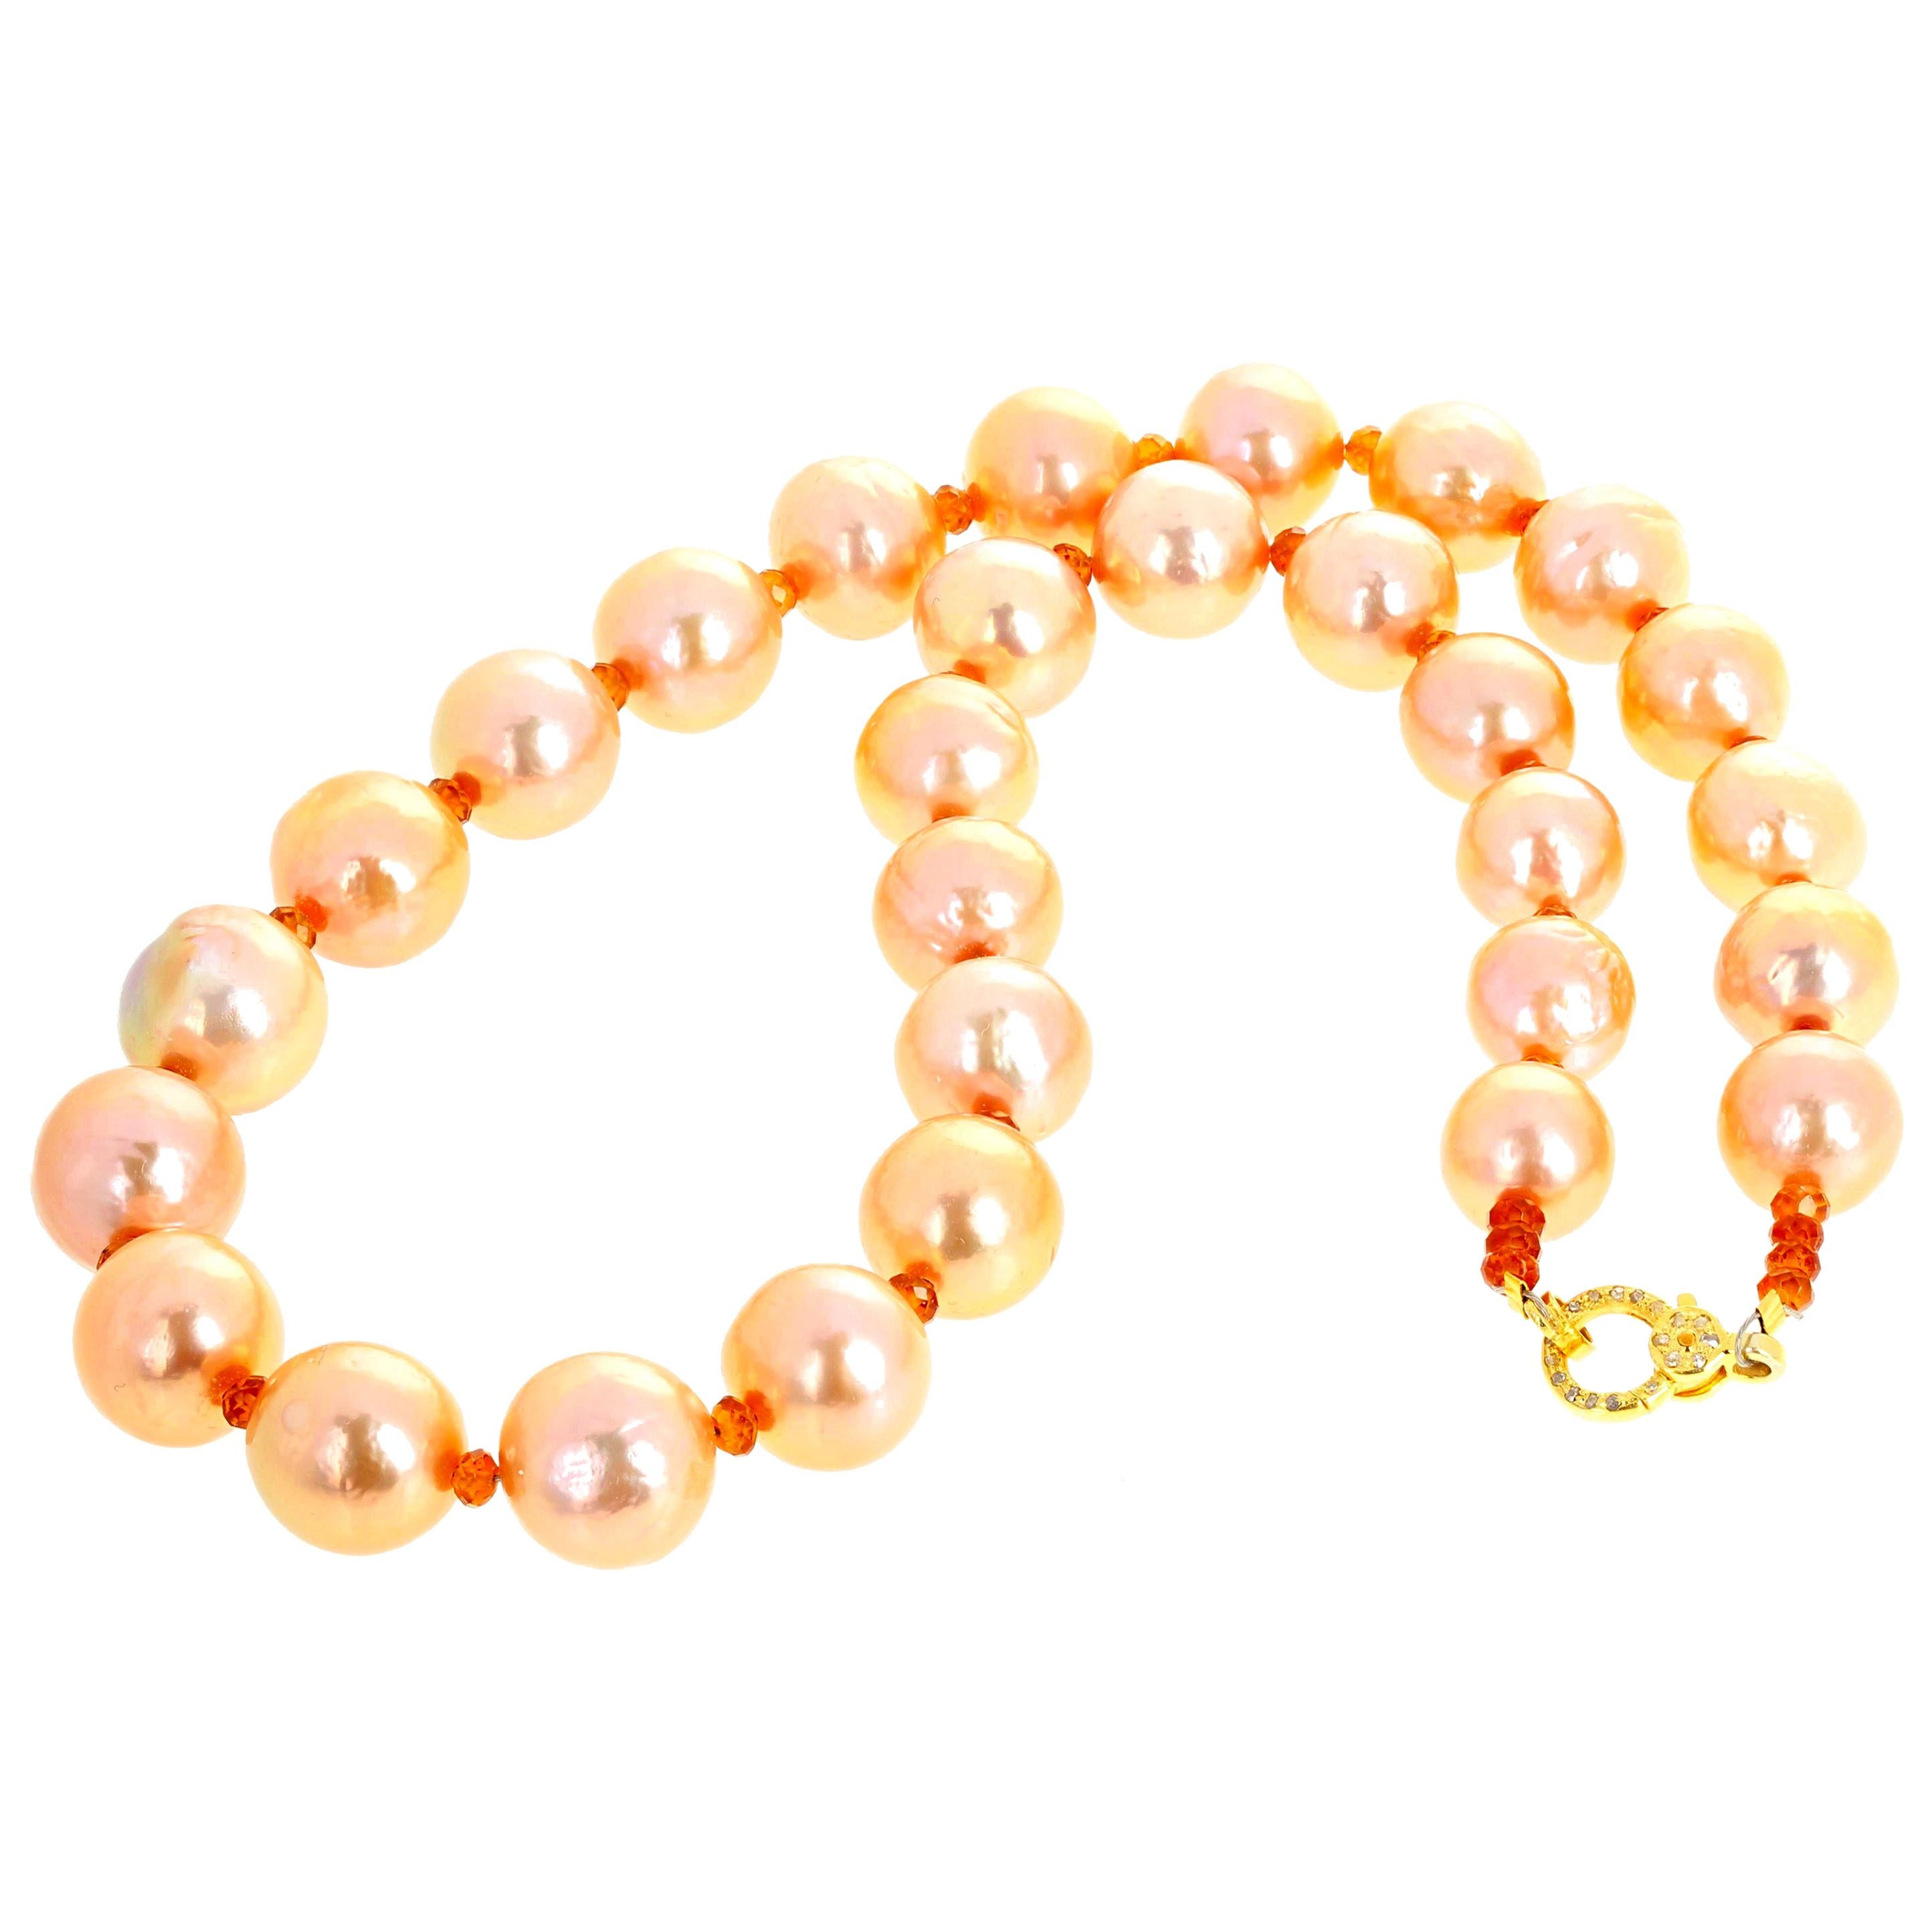 Mixed Cut AJD RARE Peachy Glowing Ocean NATURAL Pearls Necklace & Matching Earrings Set For Sale